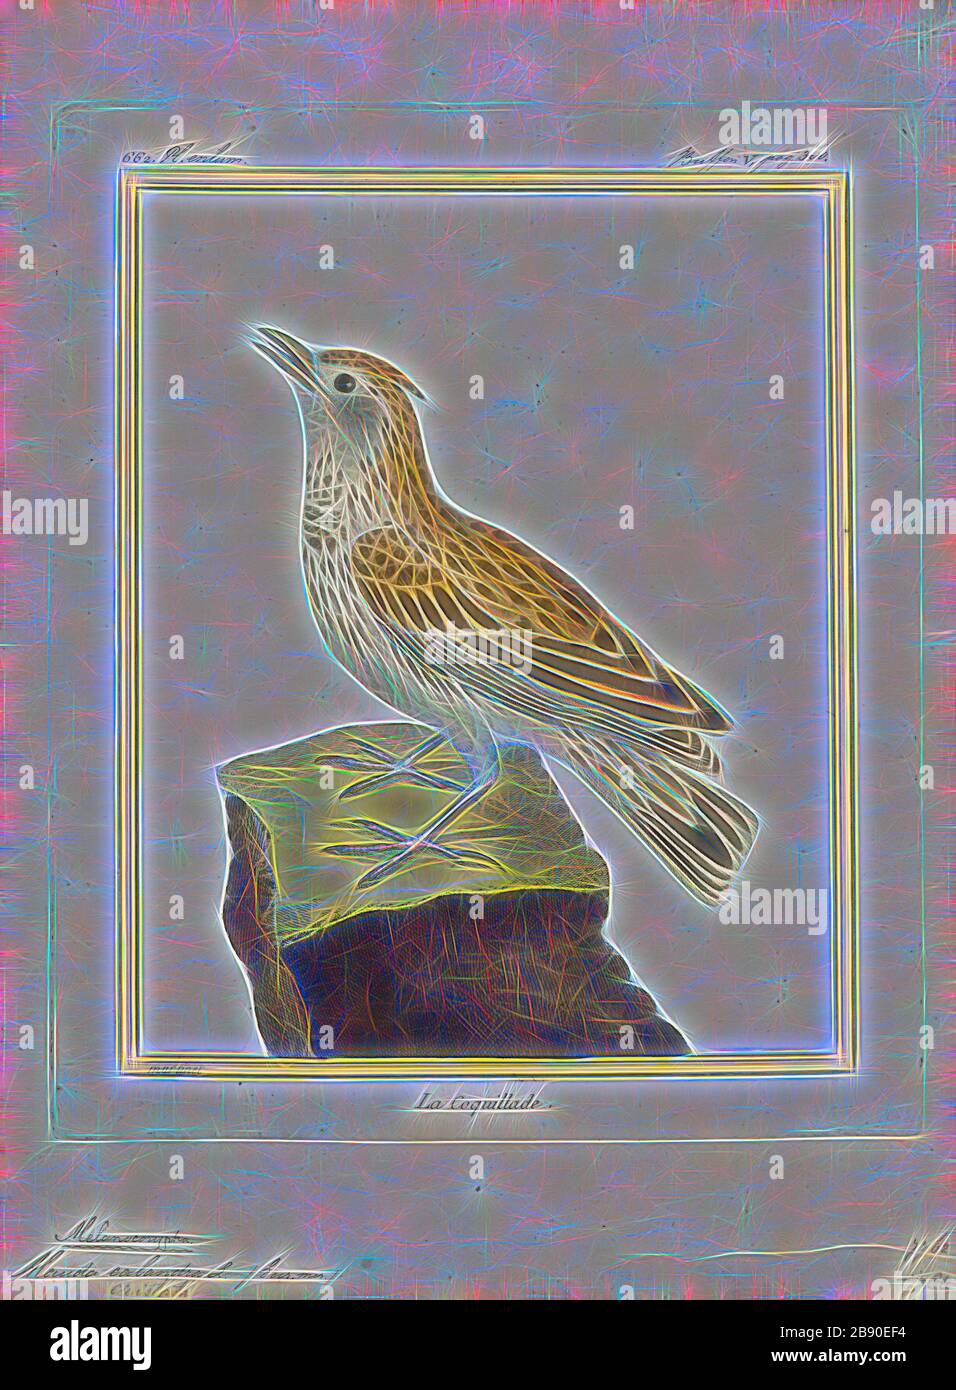 Alauda cristata, Print, The crested lark (Galerida cristata) is a species of lark distinguished from the other 81 species of lark by the crest of feathers that rise up in territorial or courtship displays and when singing. Common to mainland Europe, the birds can also be found in northern Africa and in parts of western Asia and China. It is a non-migratory bird, but can occasionally be found as a vagrant in Great Britain., 1700-1880, Reimagined by Gibon, design of warm cheerful glowing of brightness and light rays radiance. Classic art reinvented with a modern twist. Photography inspired by fu Stock Photo